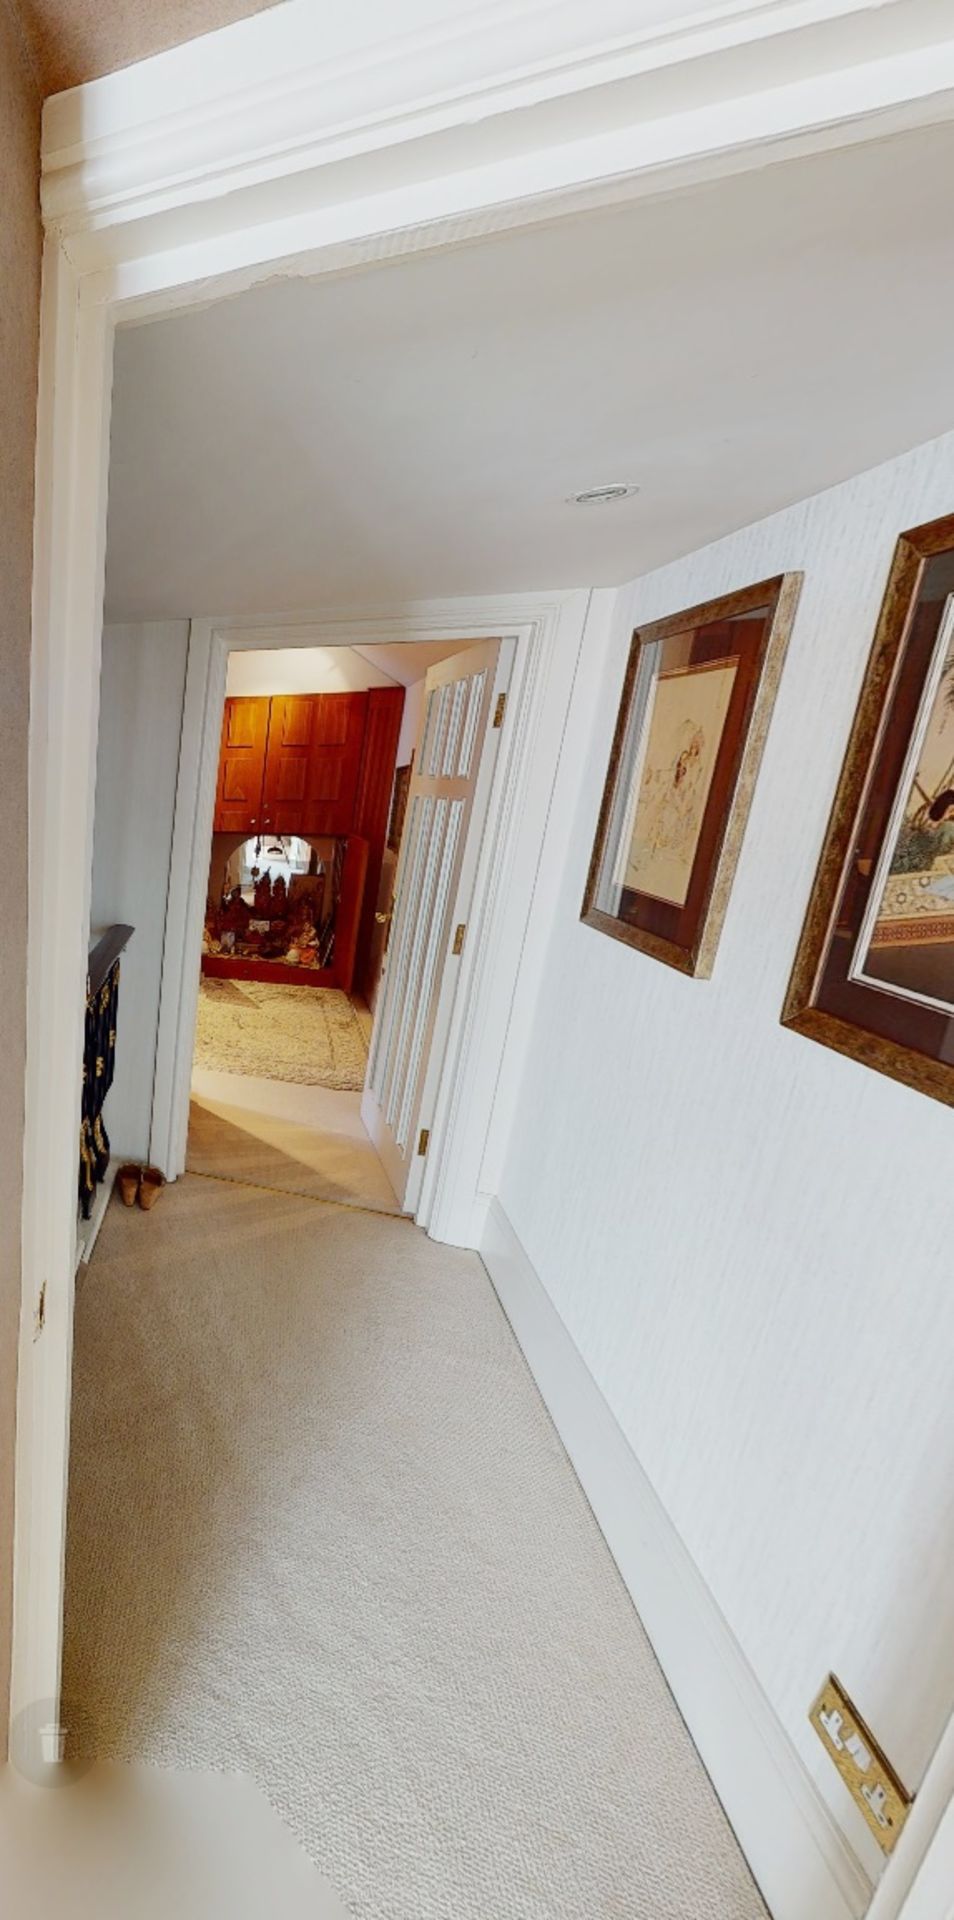 1 x Four Sections Of Upstairs Premium Carpets  In A Light Neutral Tone Which Consists Of Stairs, - Image 3 of 7